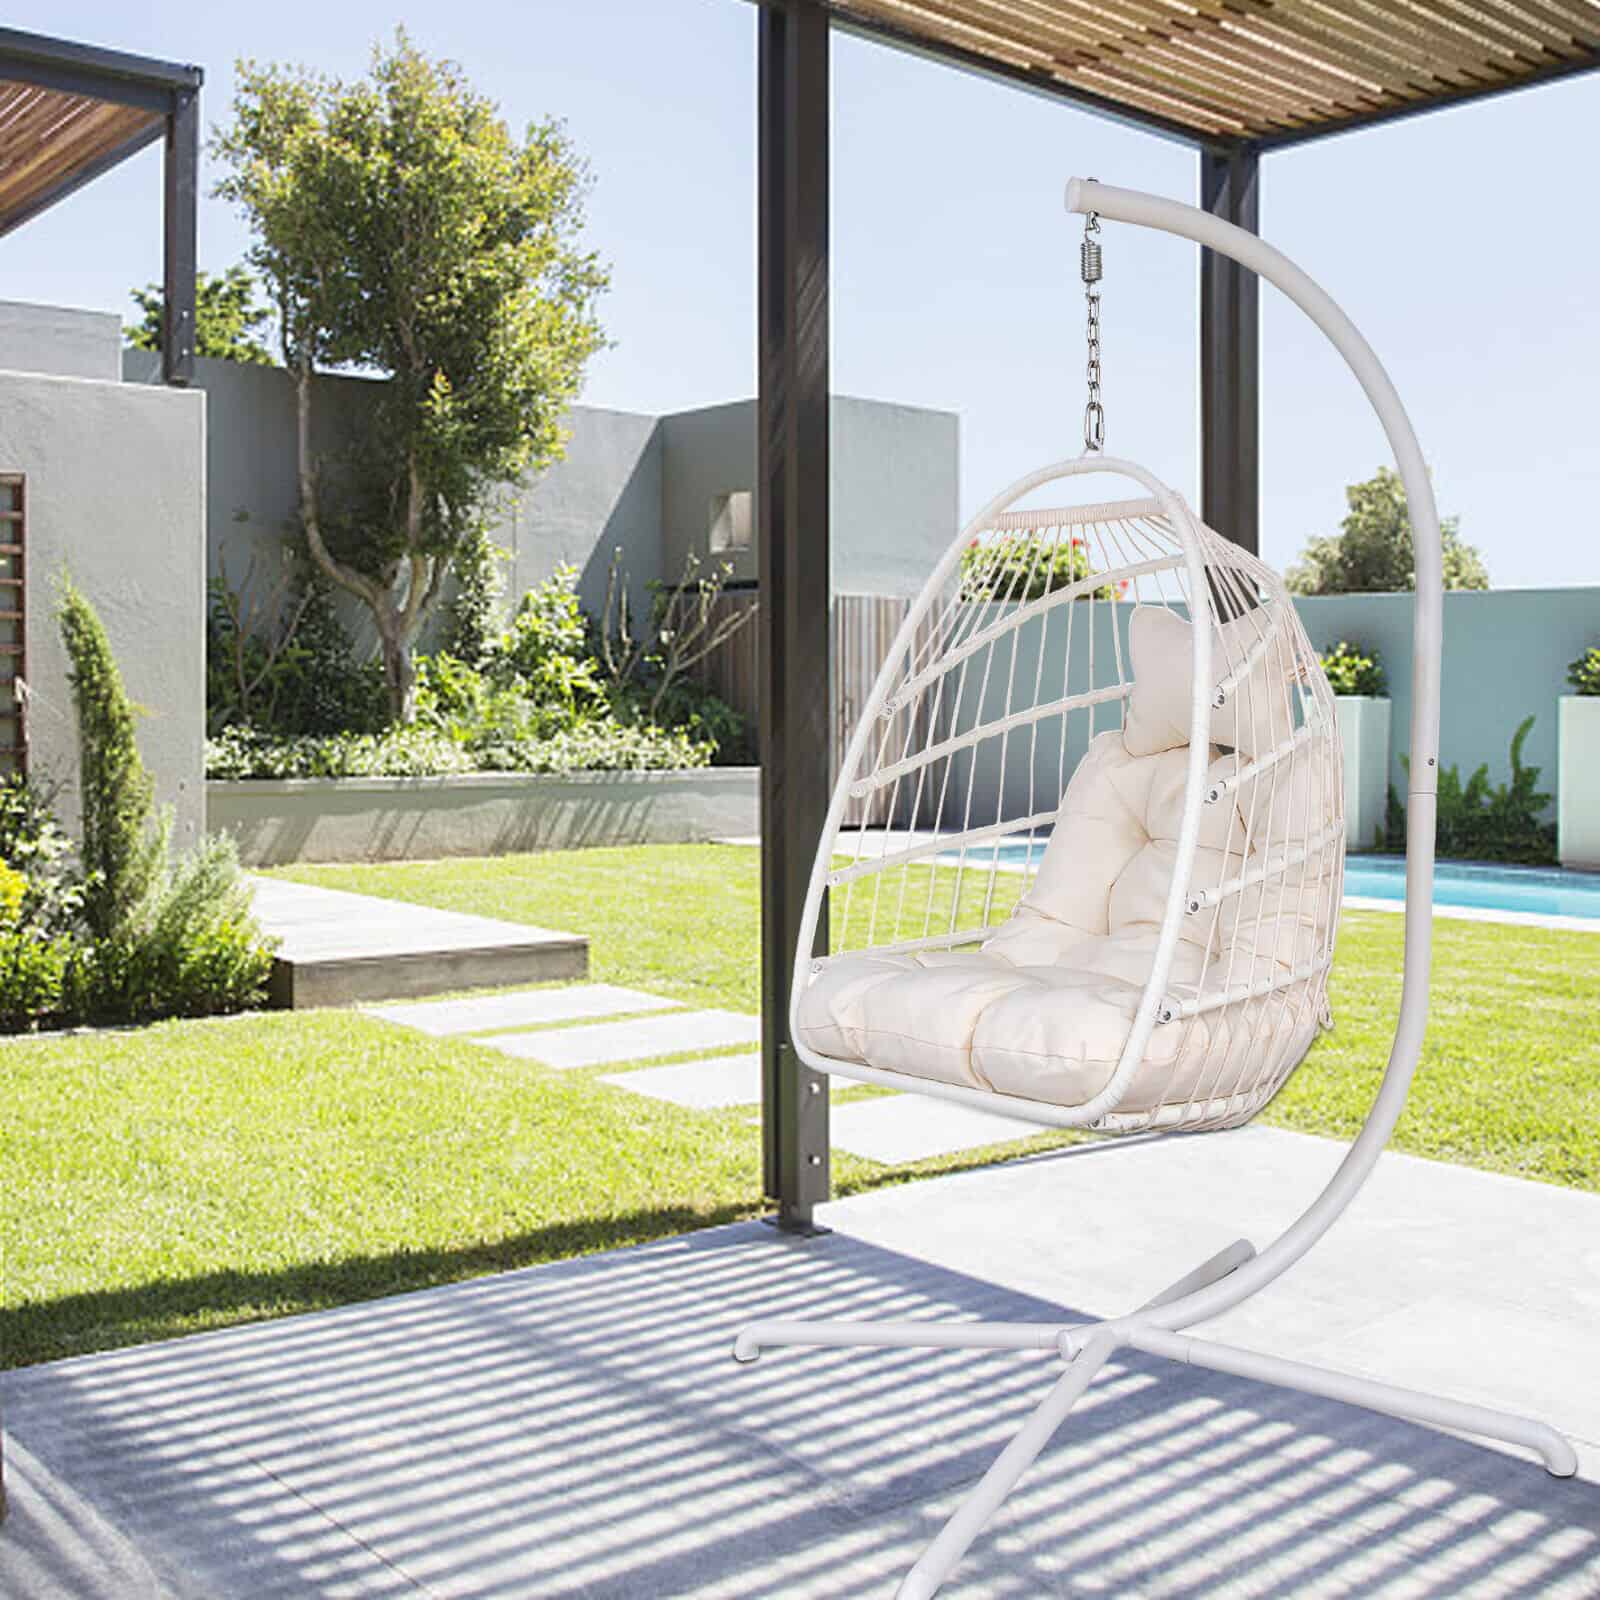 A white hanging chair in a backyard with a pool.